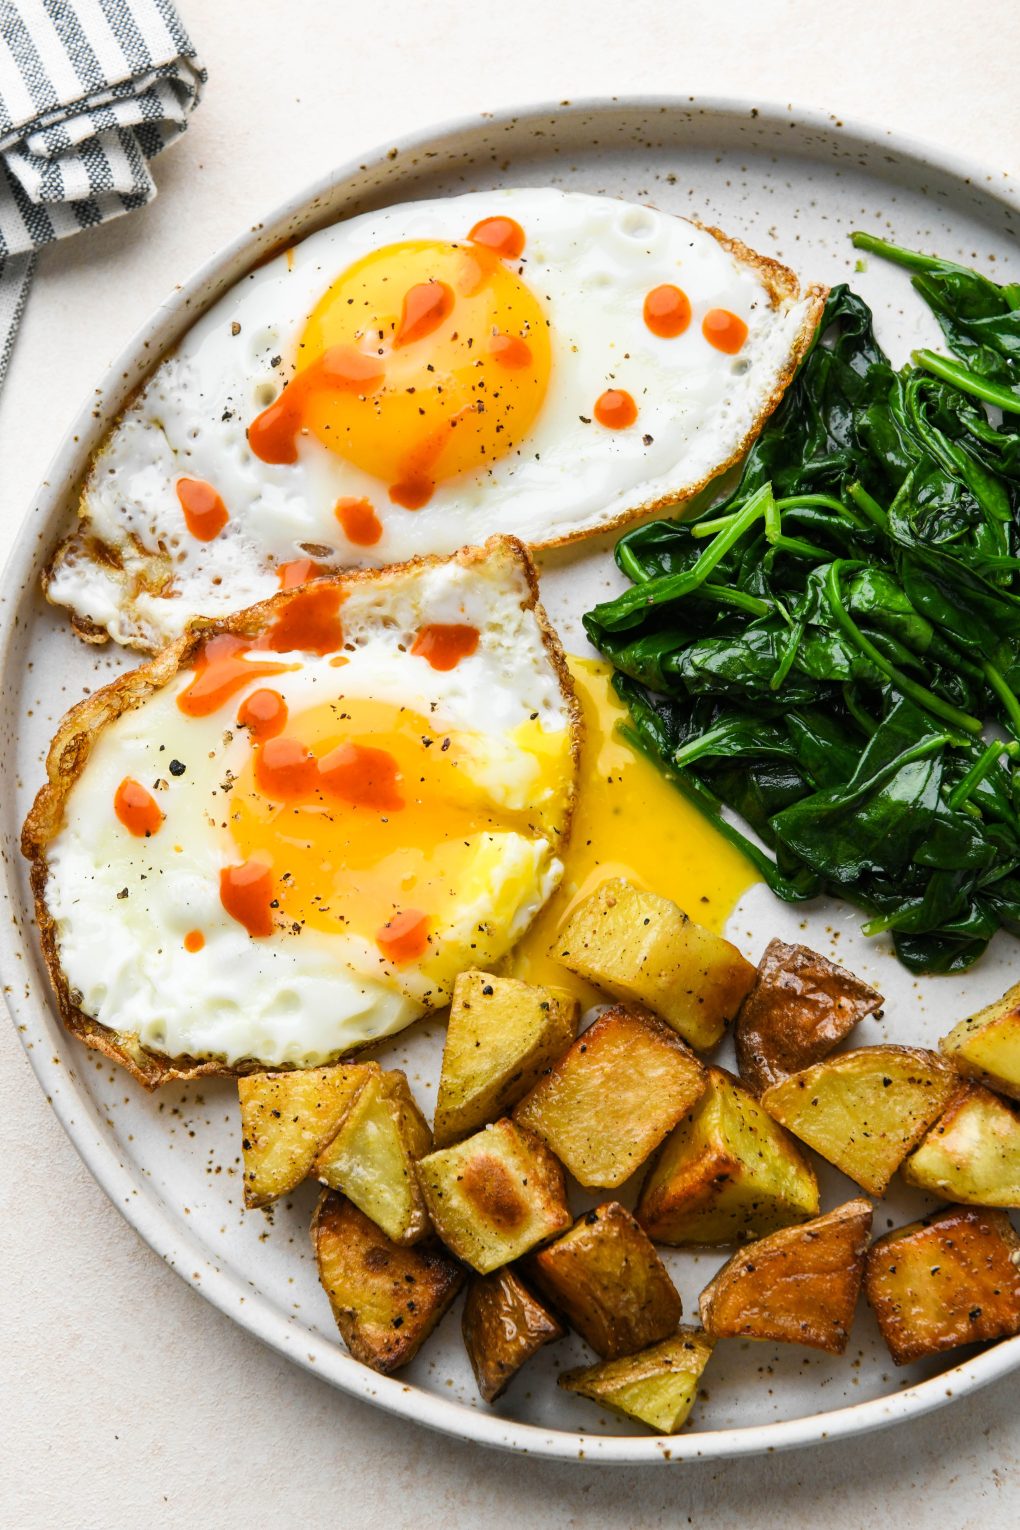 Whole30 breakfast on a speckled plate: Sunny side up fried eggs with hot sauce, sautéed spinach, and roasted potatoes.